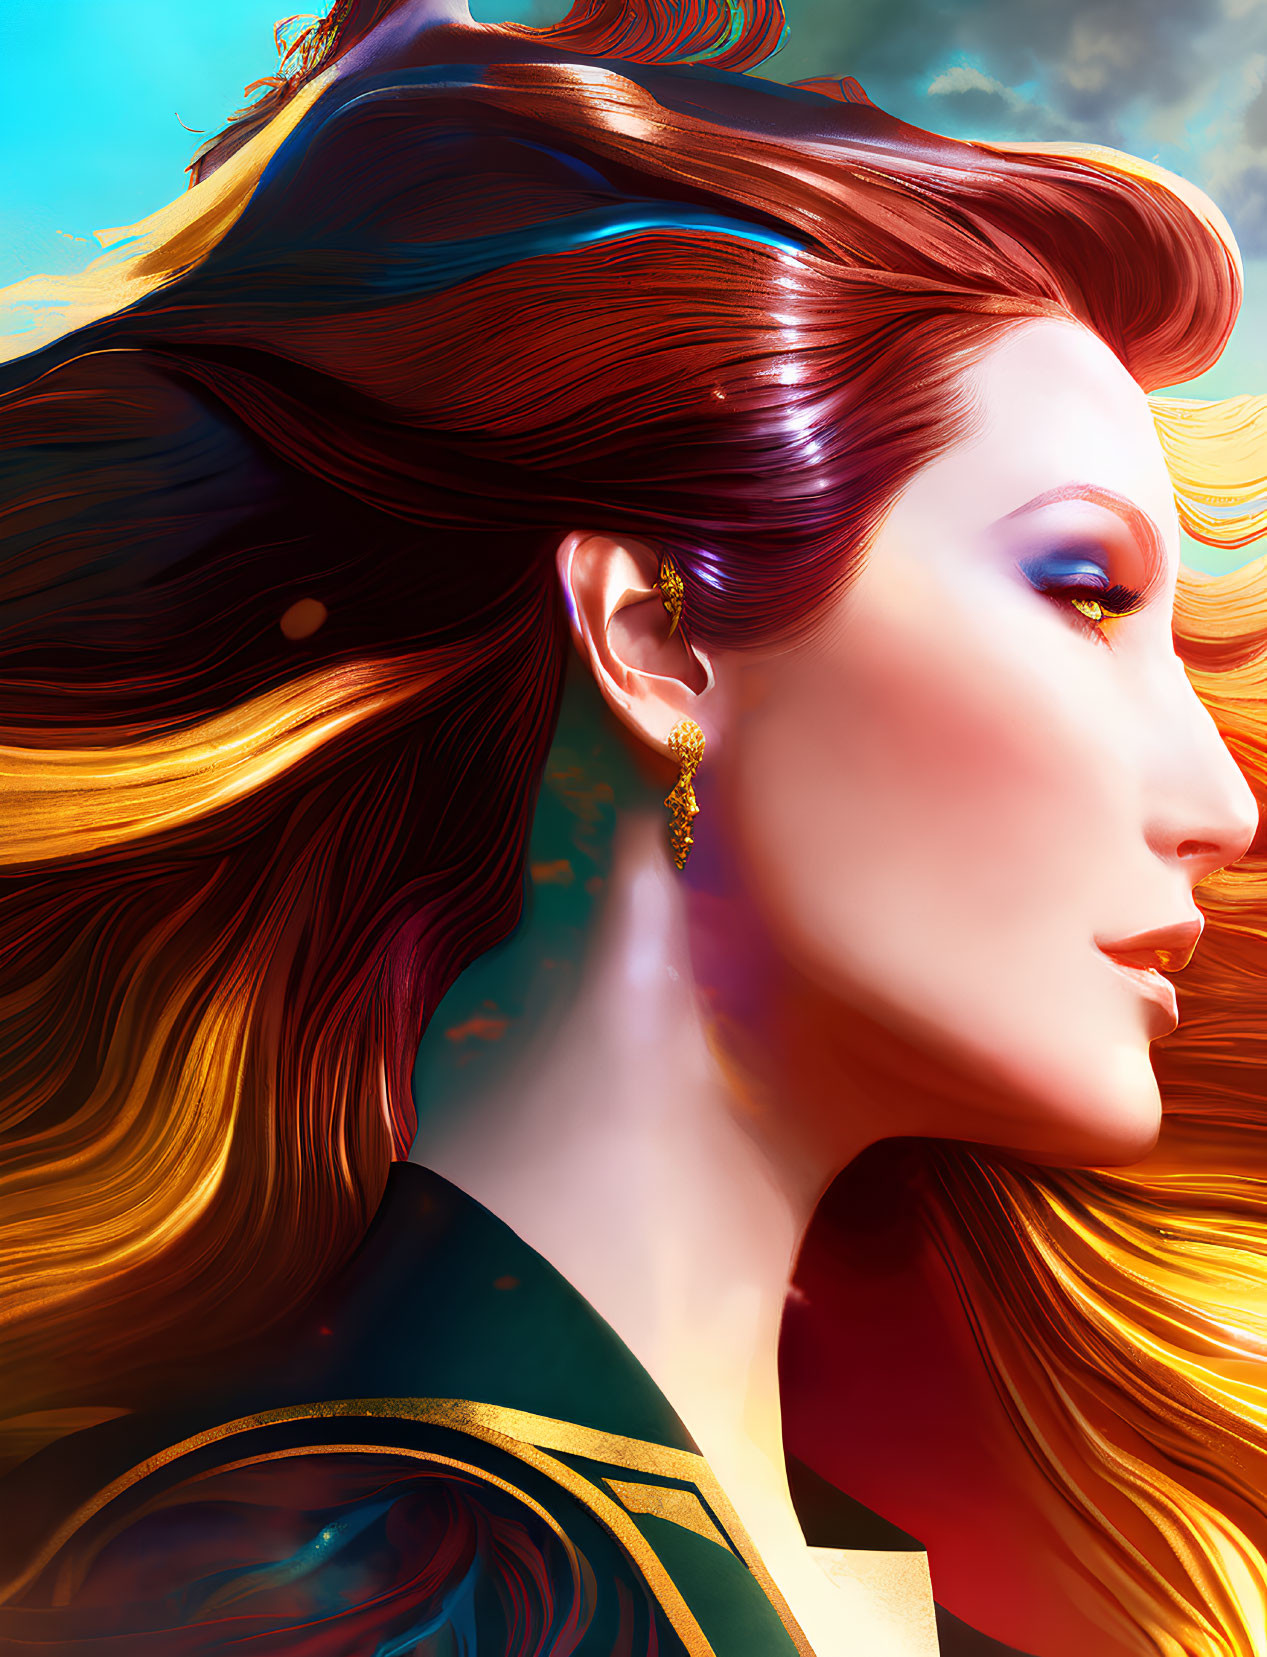 Colorful digital artwork: Woman with multicolored hair and ornate earring against vibrant sky